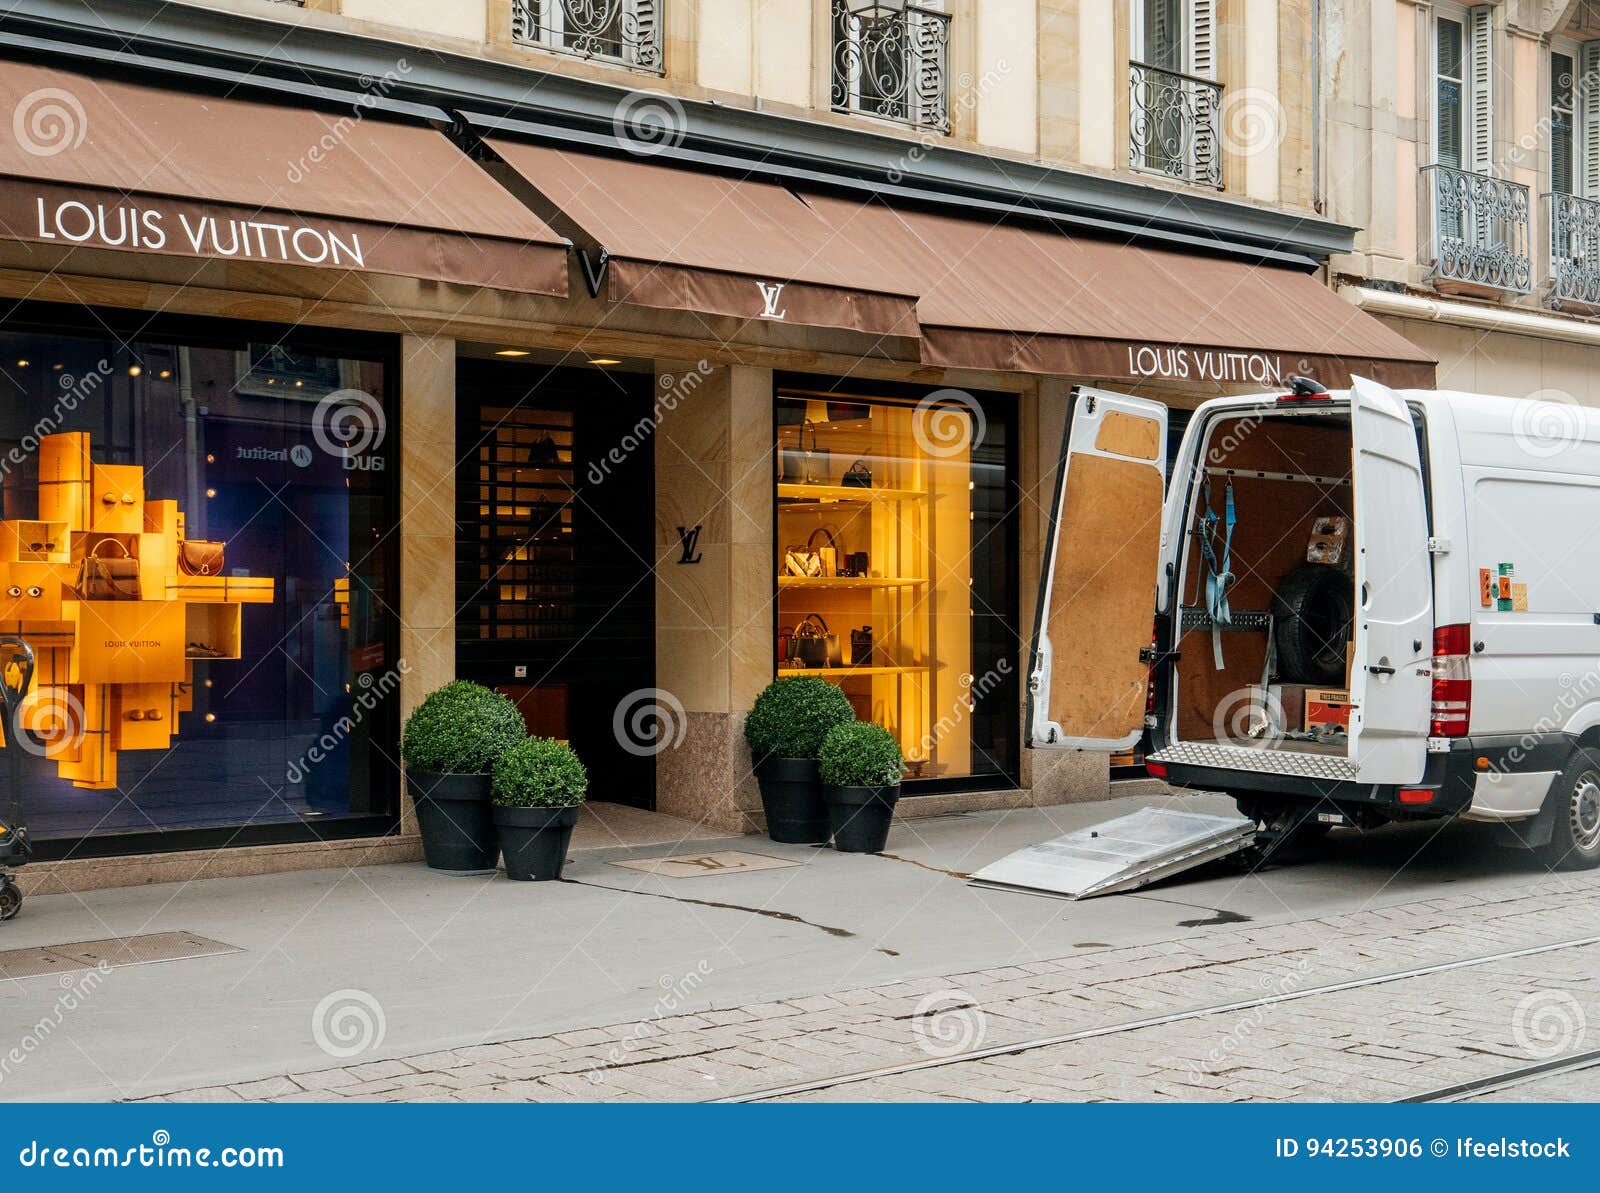 Delivery Van For The Fashion Store Louis Vuitton Editorial Photo - Image of designer, parcel ...